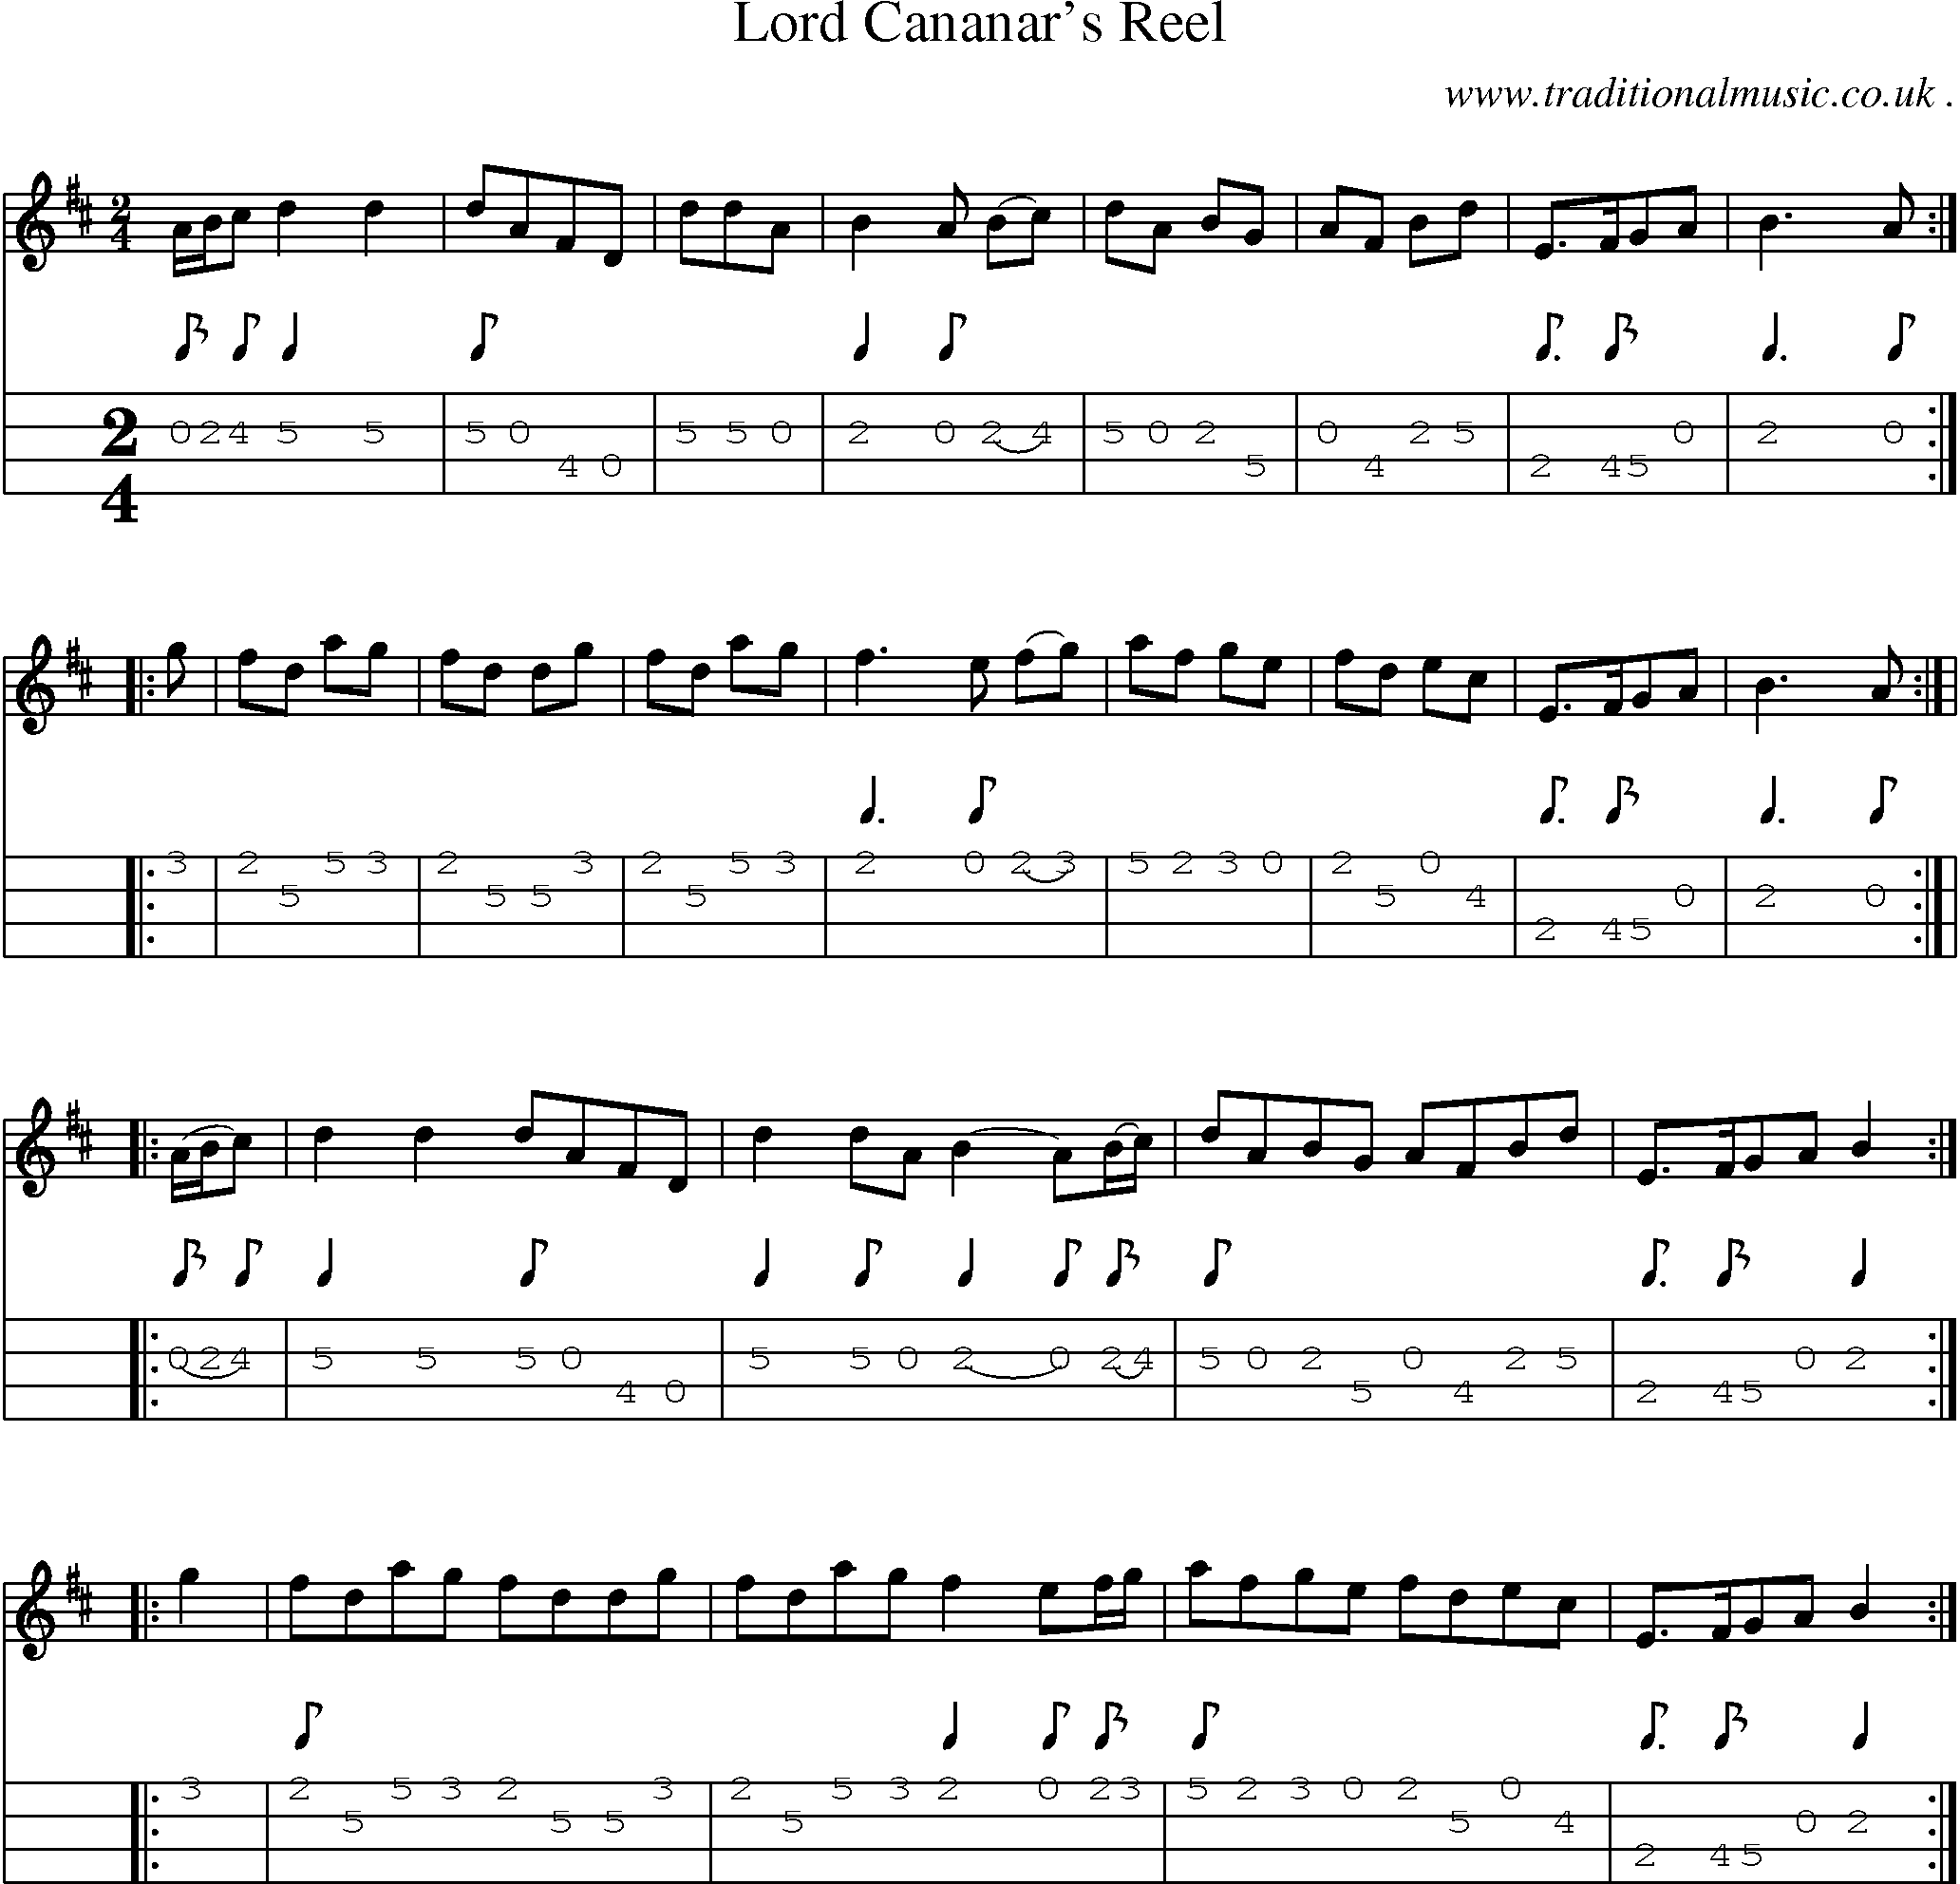 Sheet-Music and Mandolin Tabs for Lord Cananars Reel